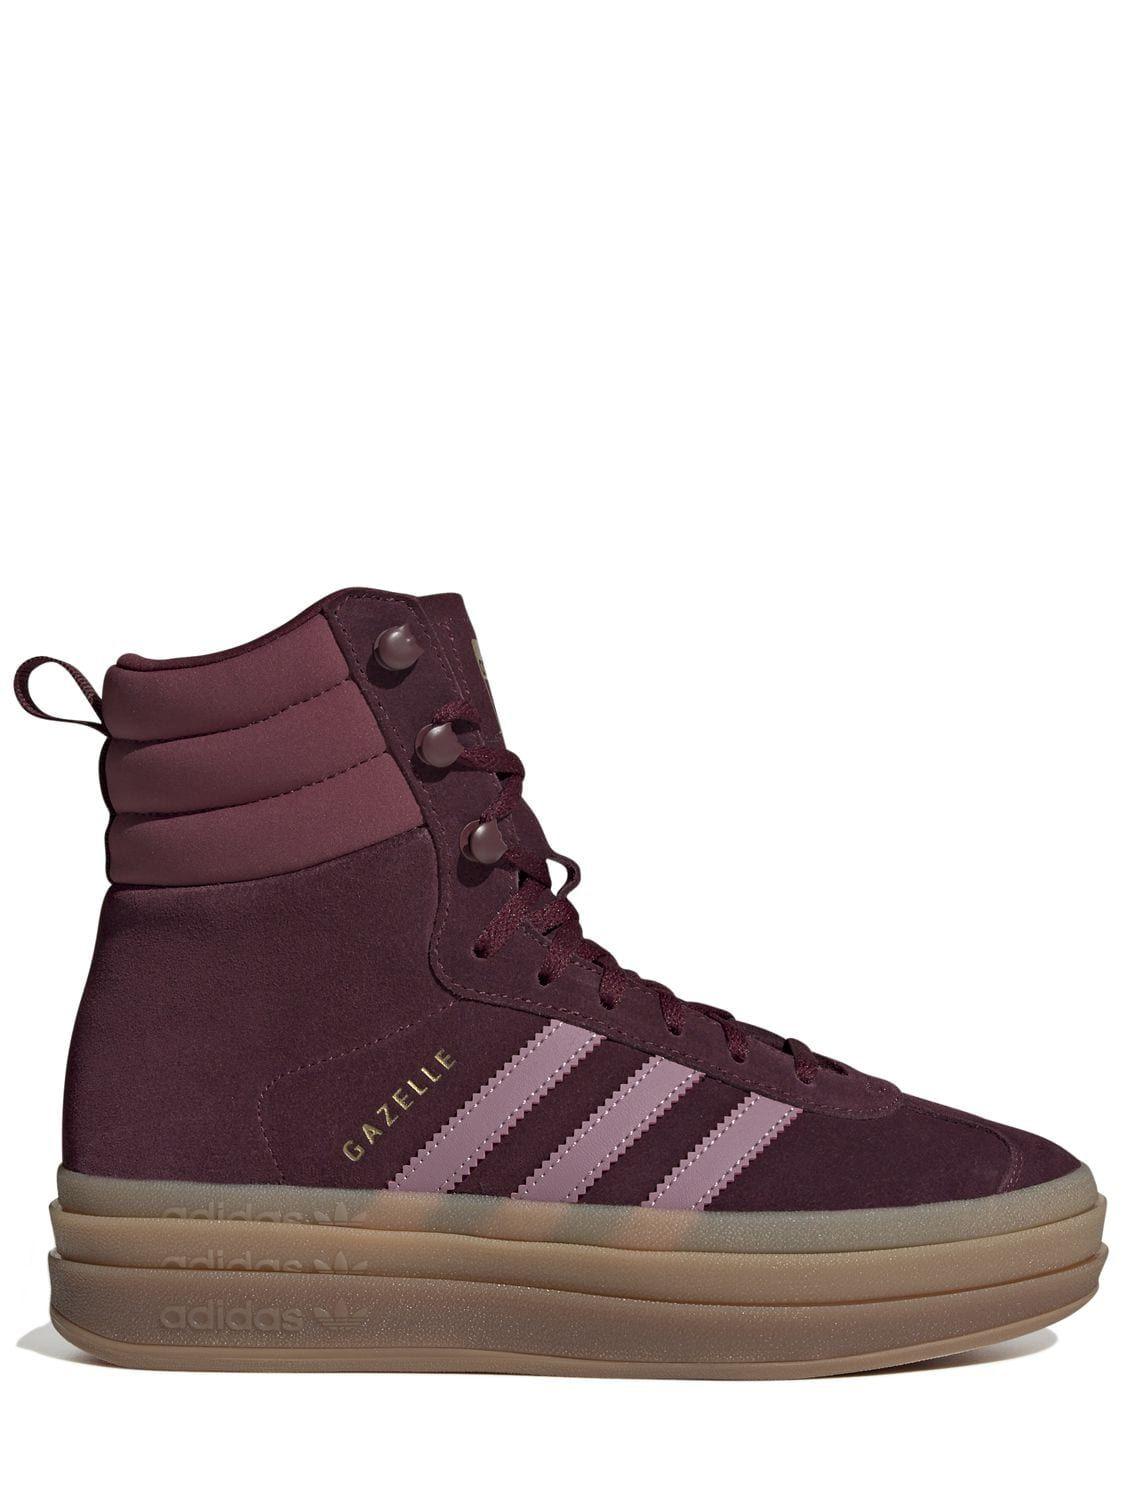 adidas Originals Gazelle Bold High Top Sneakers in Brown | Lyst